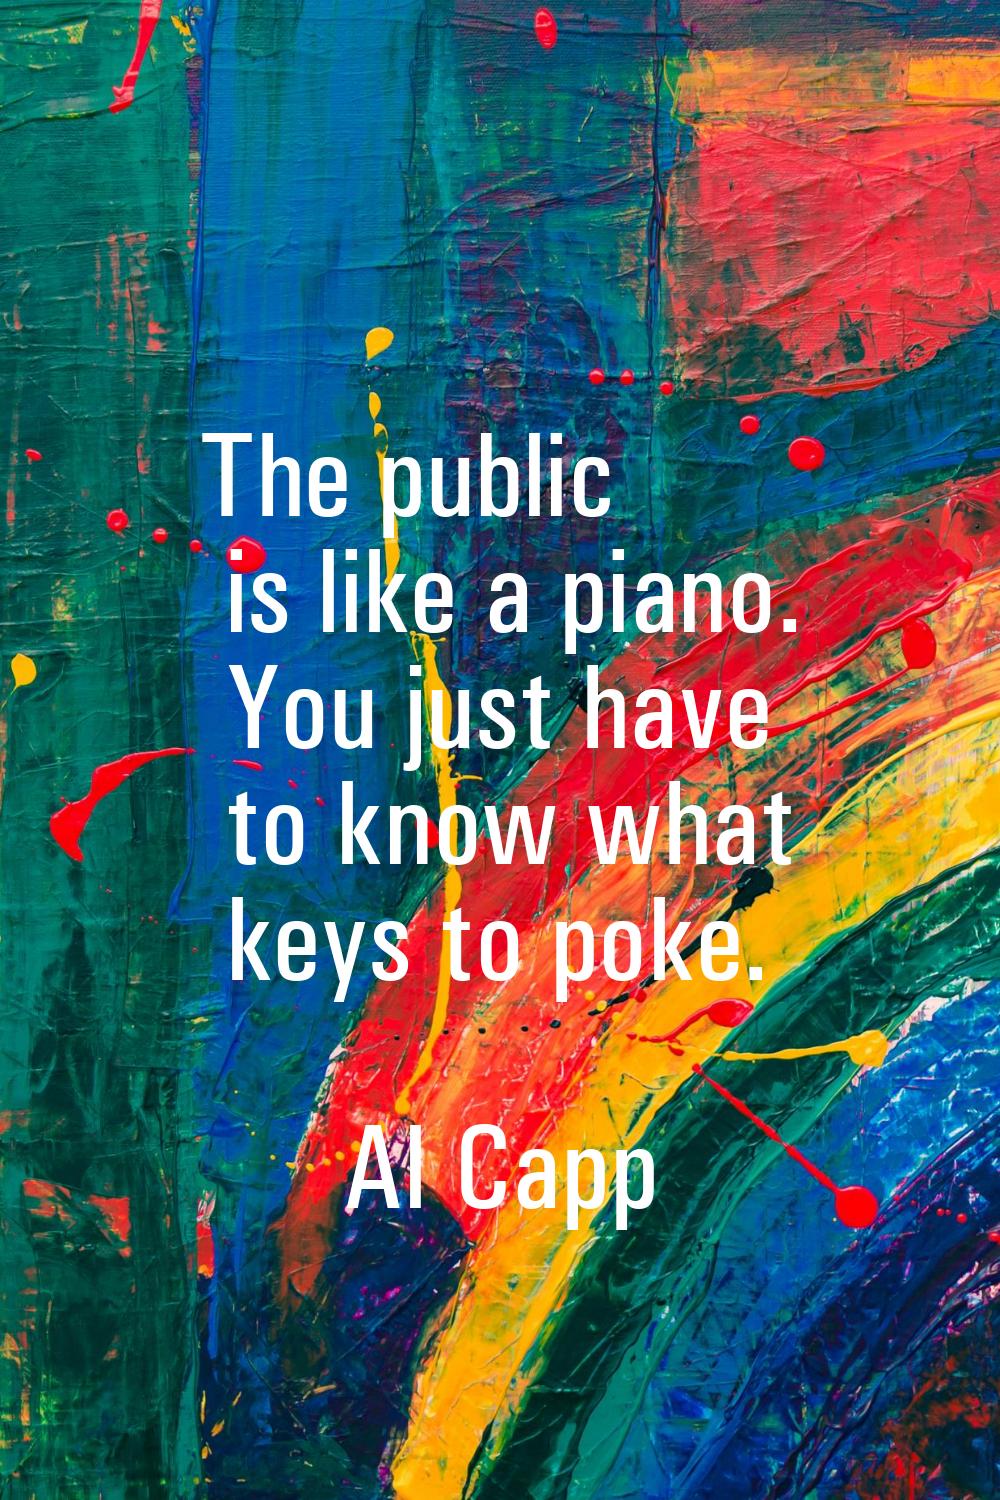 The public is like a piano. You just have to know what keys to poke.